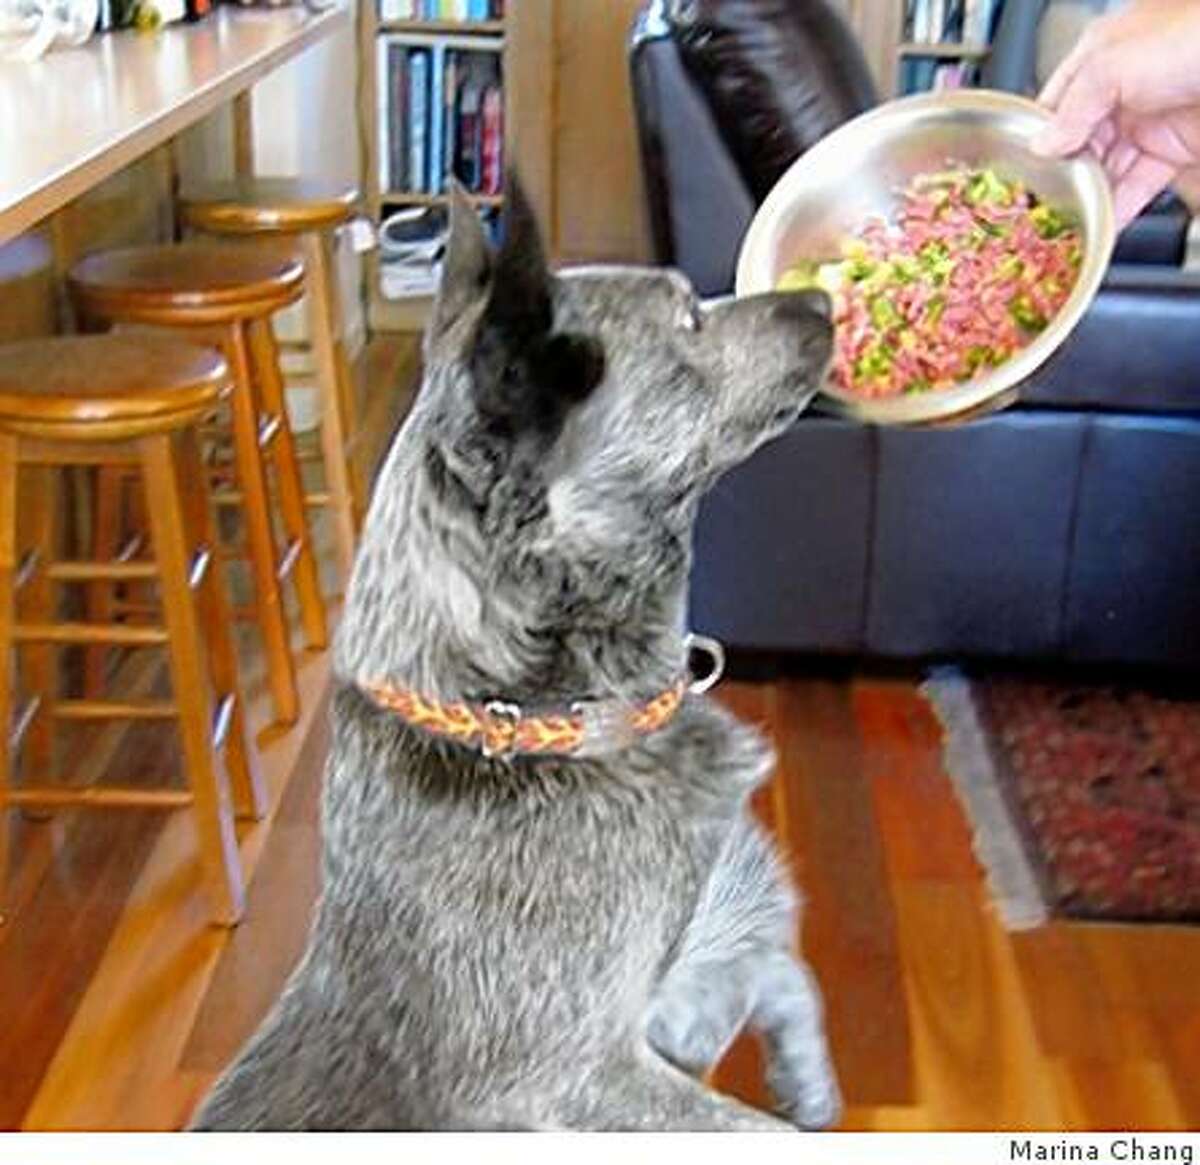 Tater loves the raw, grass-fed, sustainably raised meat and organic produce that his owner, Marina Chang, feeds him.